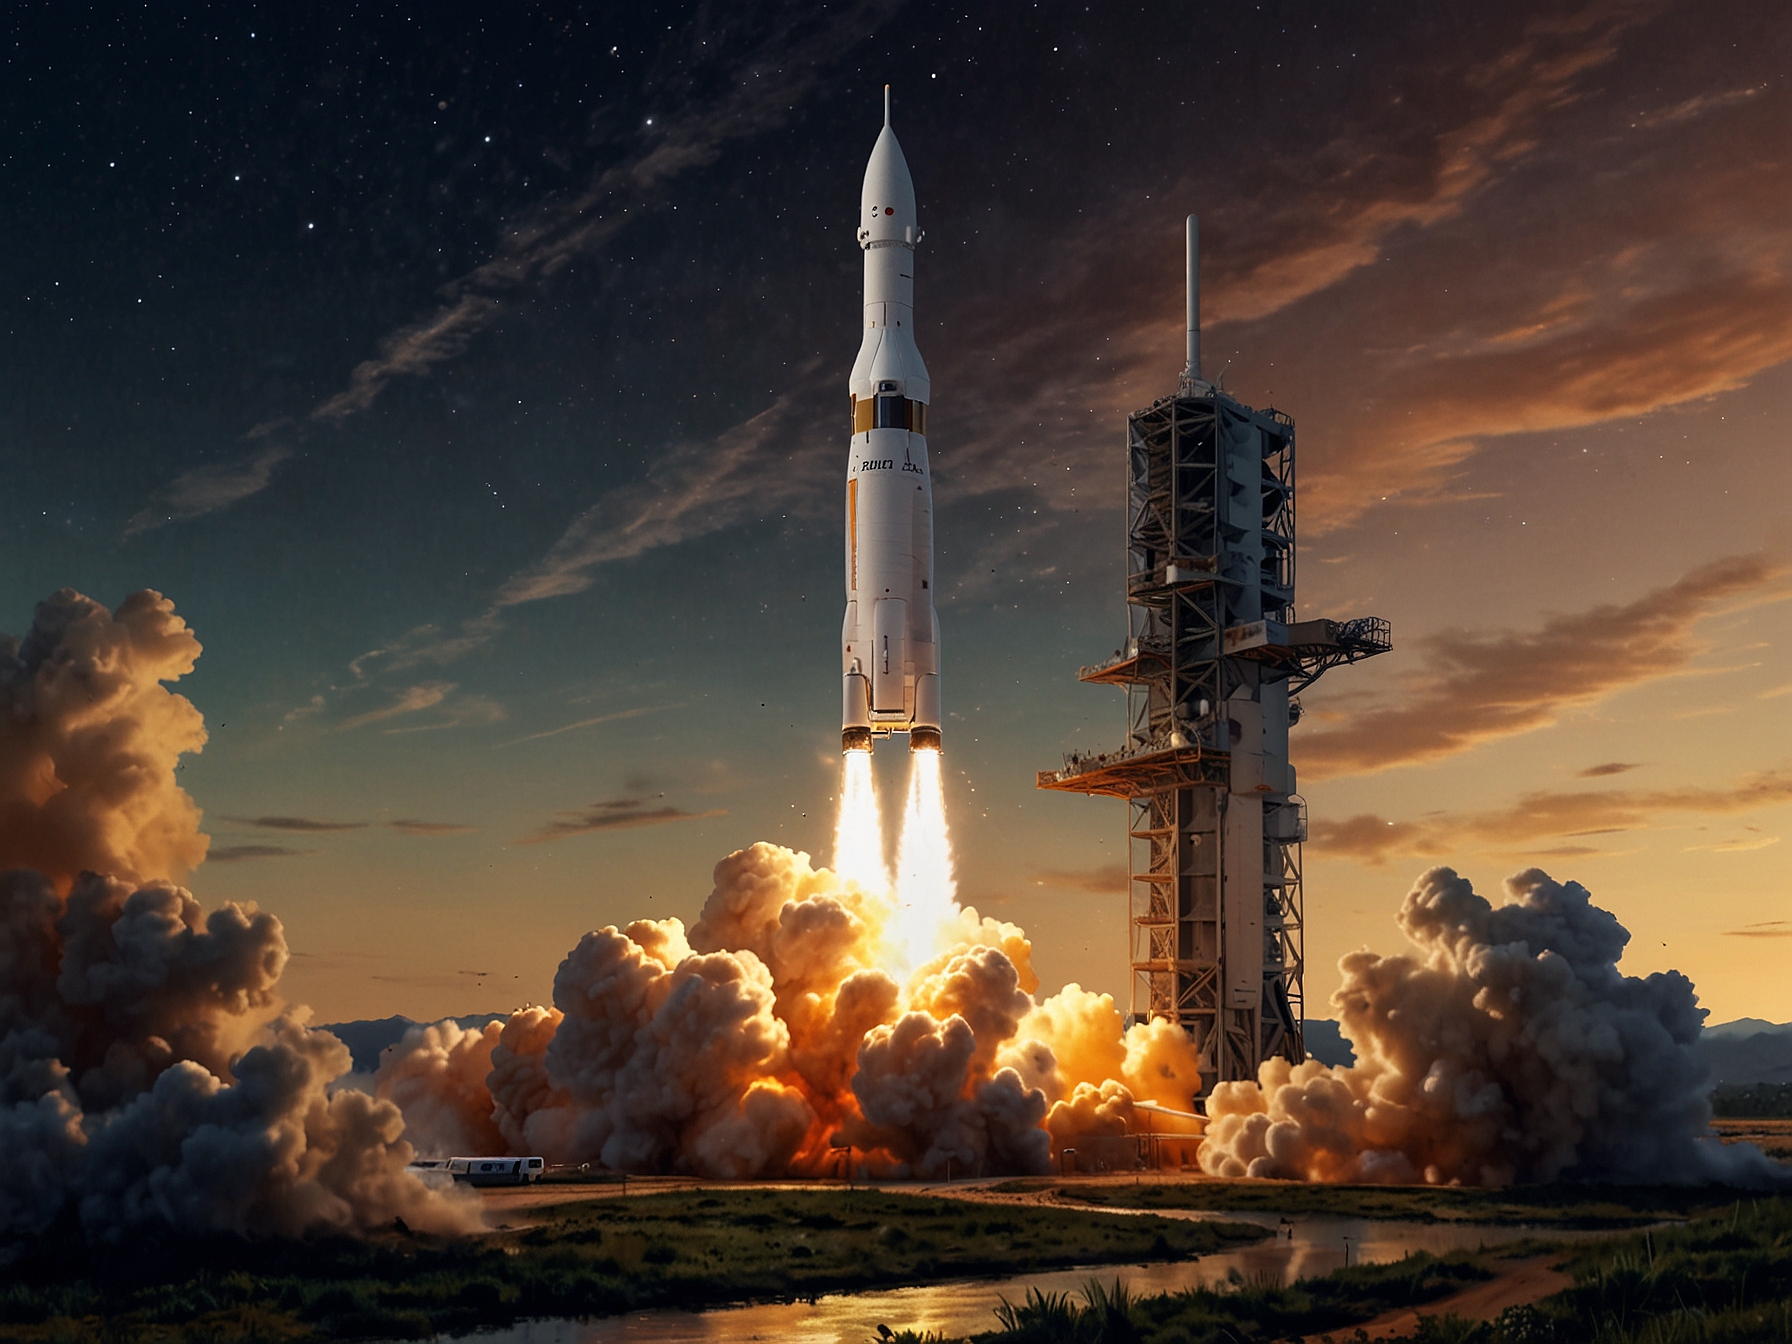 Illustration of Ariane 6 lifting off from the launch pad, highlighting its sleek design and powerful engines, symbolizing Europe's technological advancements in space technology.